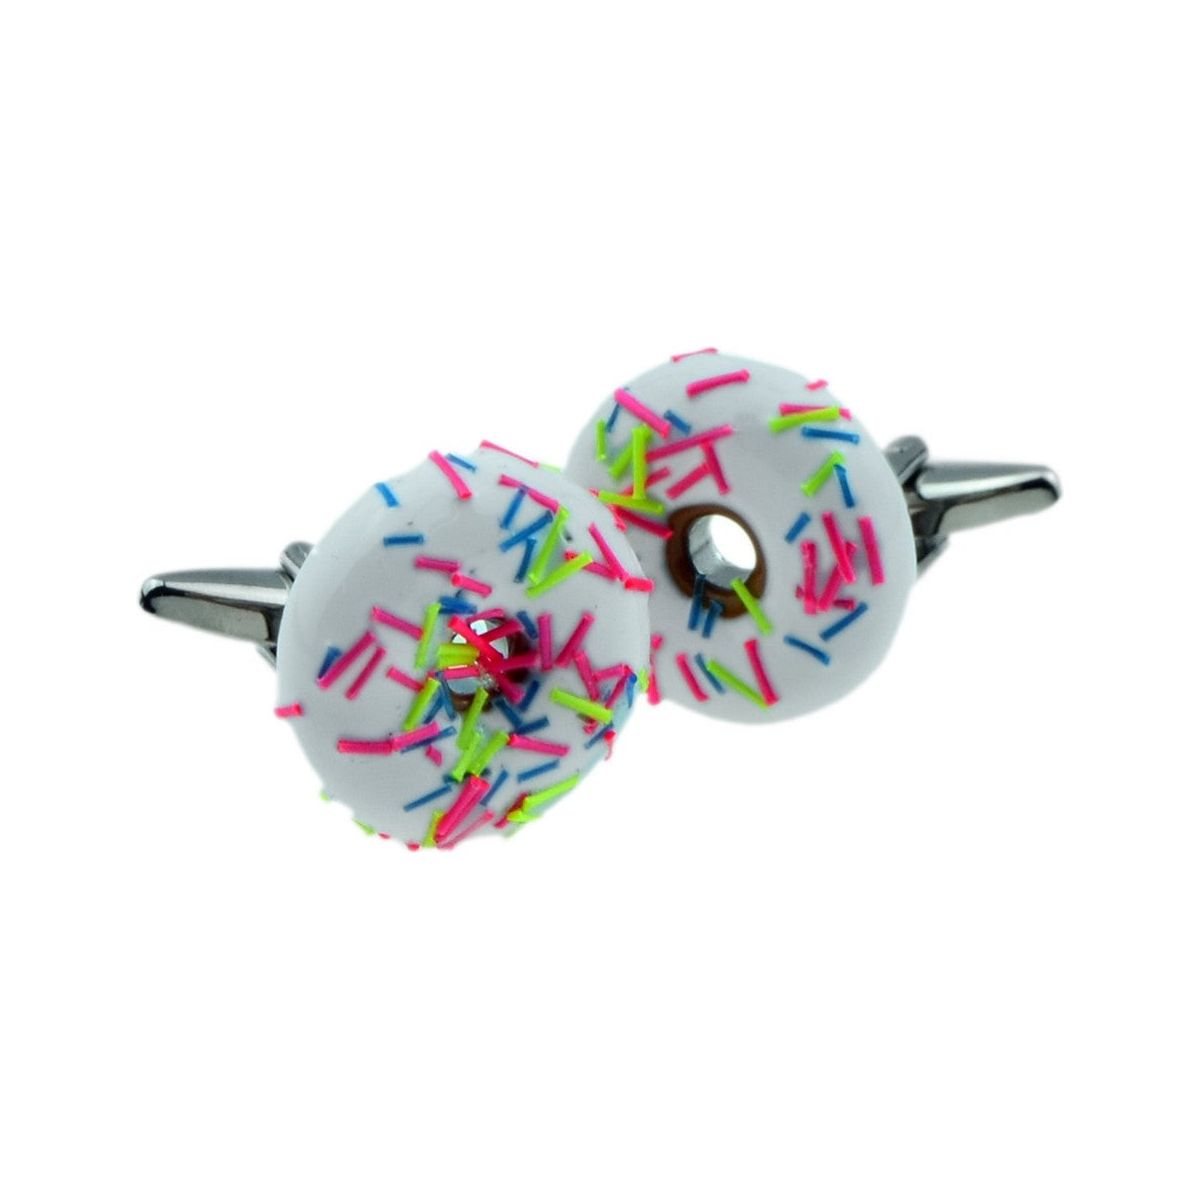 Iced Donut with coloured sprinkles Cufflinks - Ashton and Finch